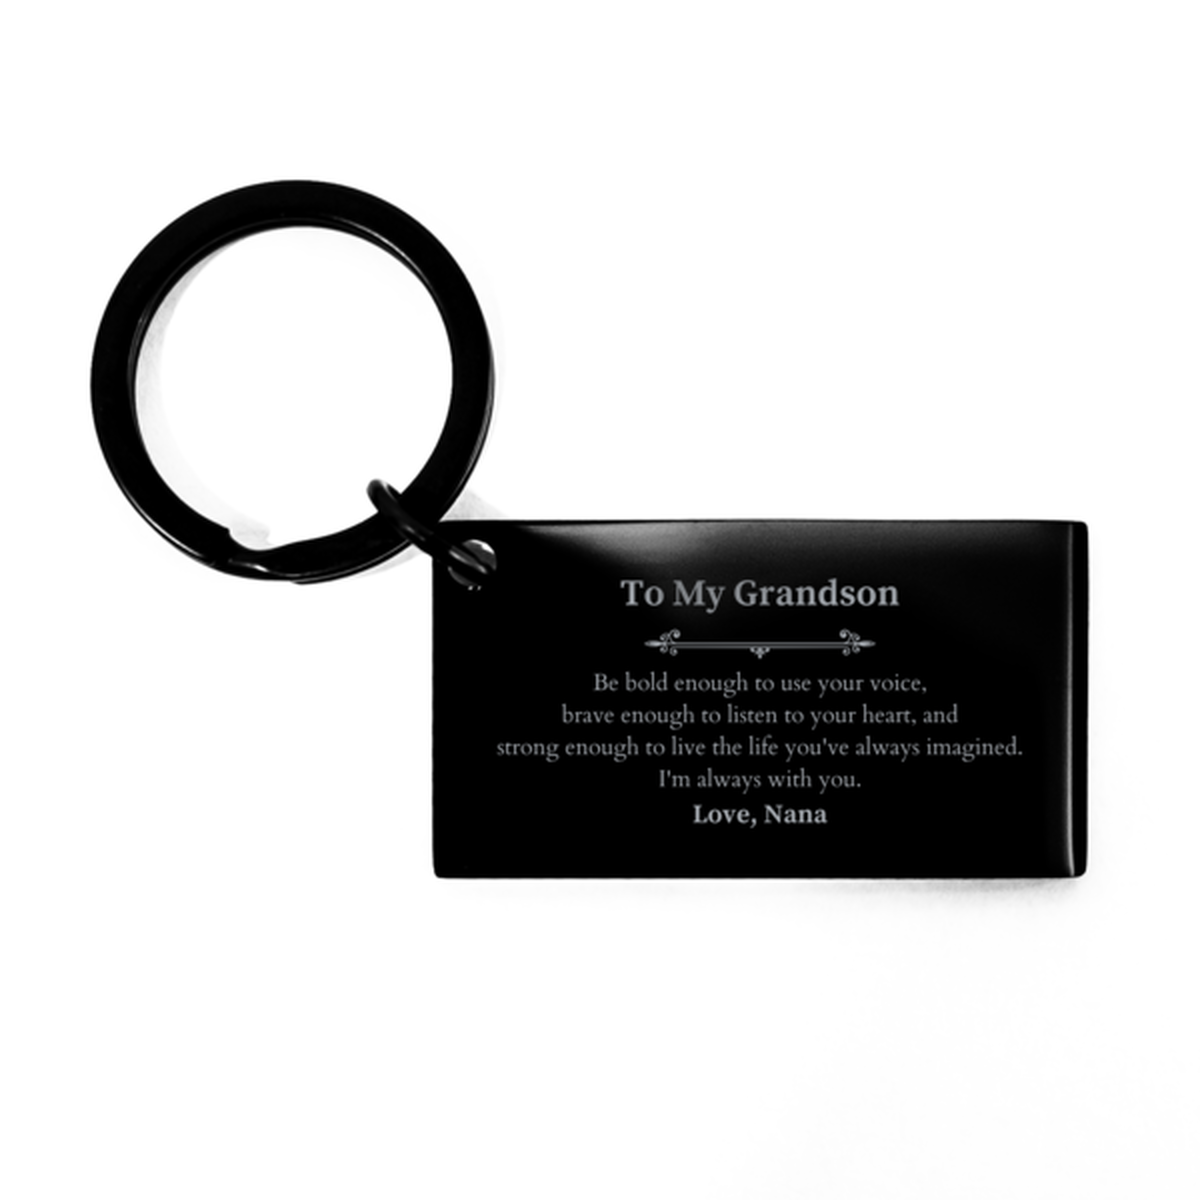 Keepsake Grandson Keychain Gift Idea Graduation Christmas Birthday Grandson from Nana, Grandson Be bold enough to use your voice, brave enough to listen to your heart. Love, Nana